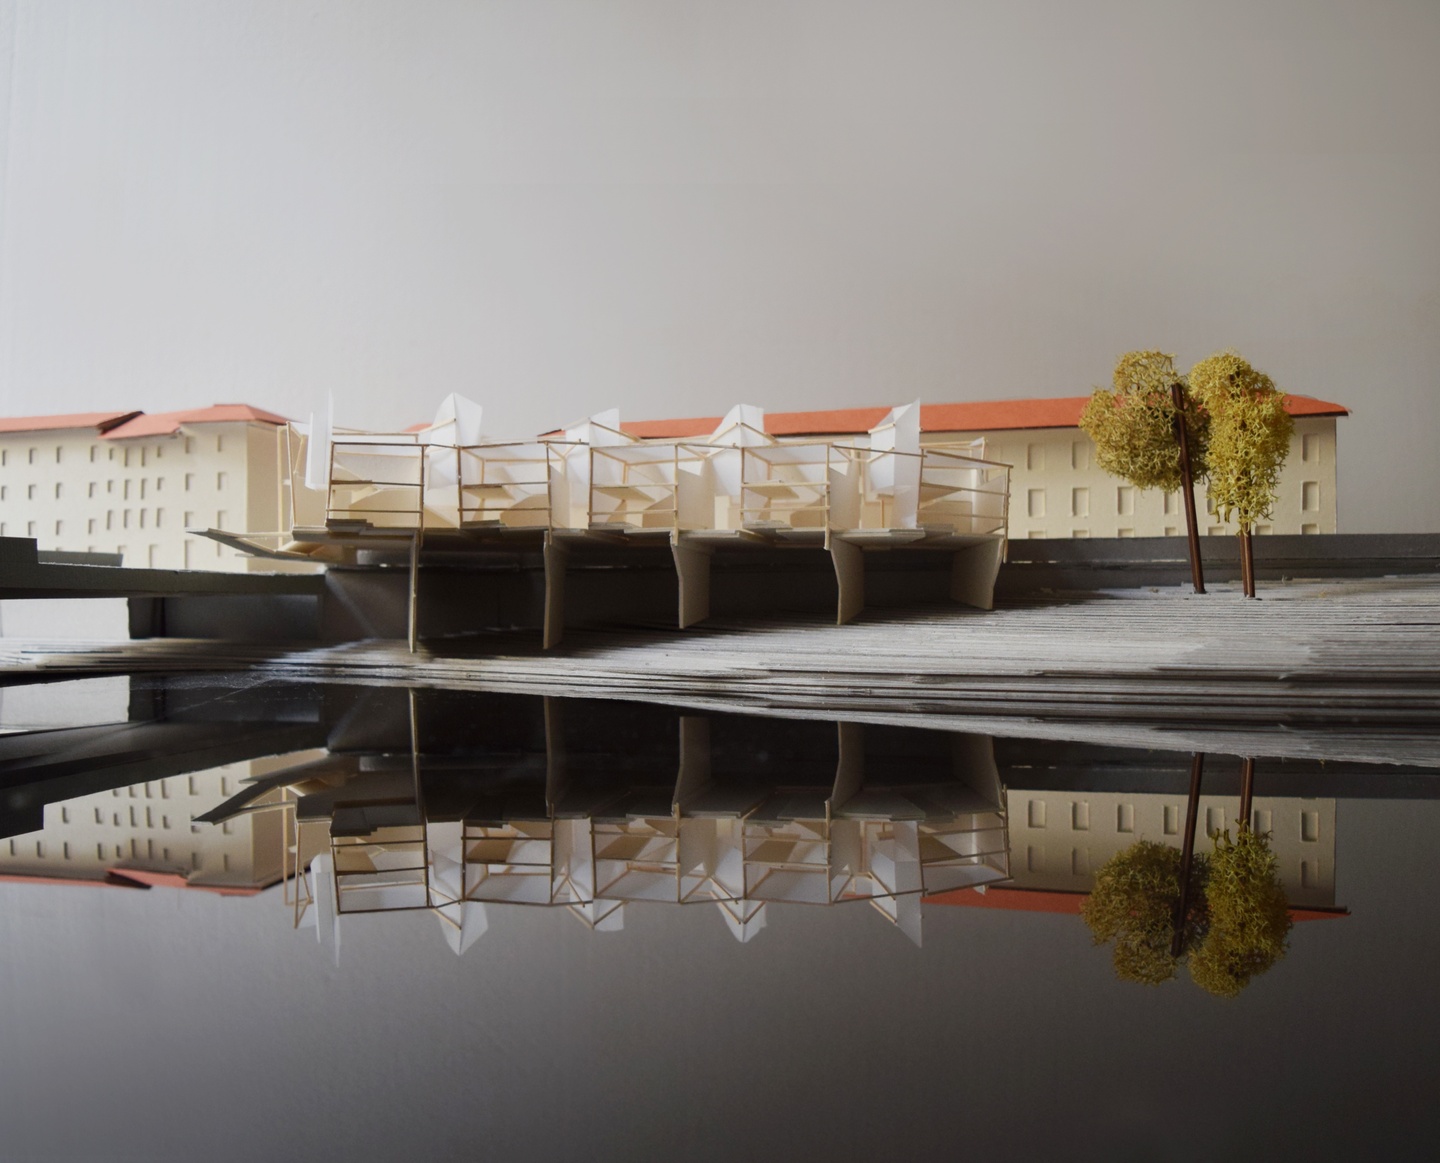 Scale model of a pier structure on a waterfront, backed by hotel buildings with red roofs.